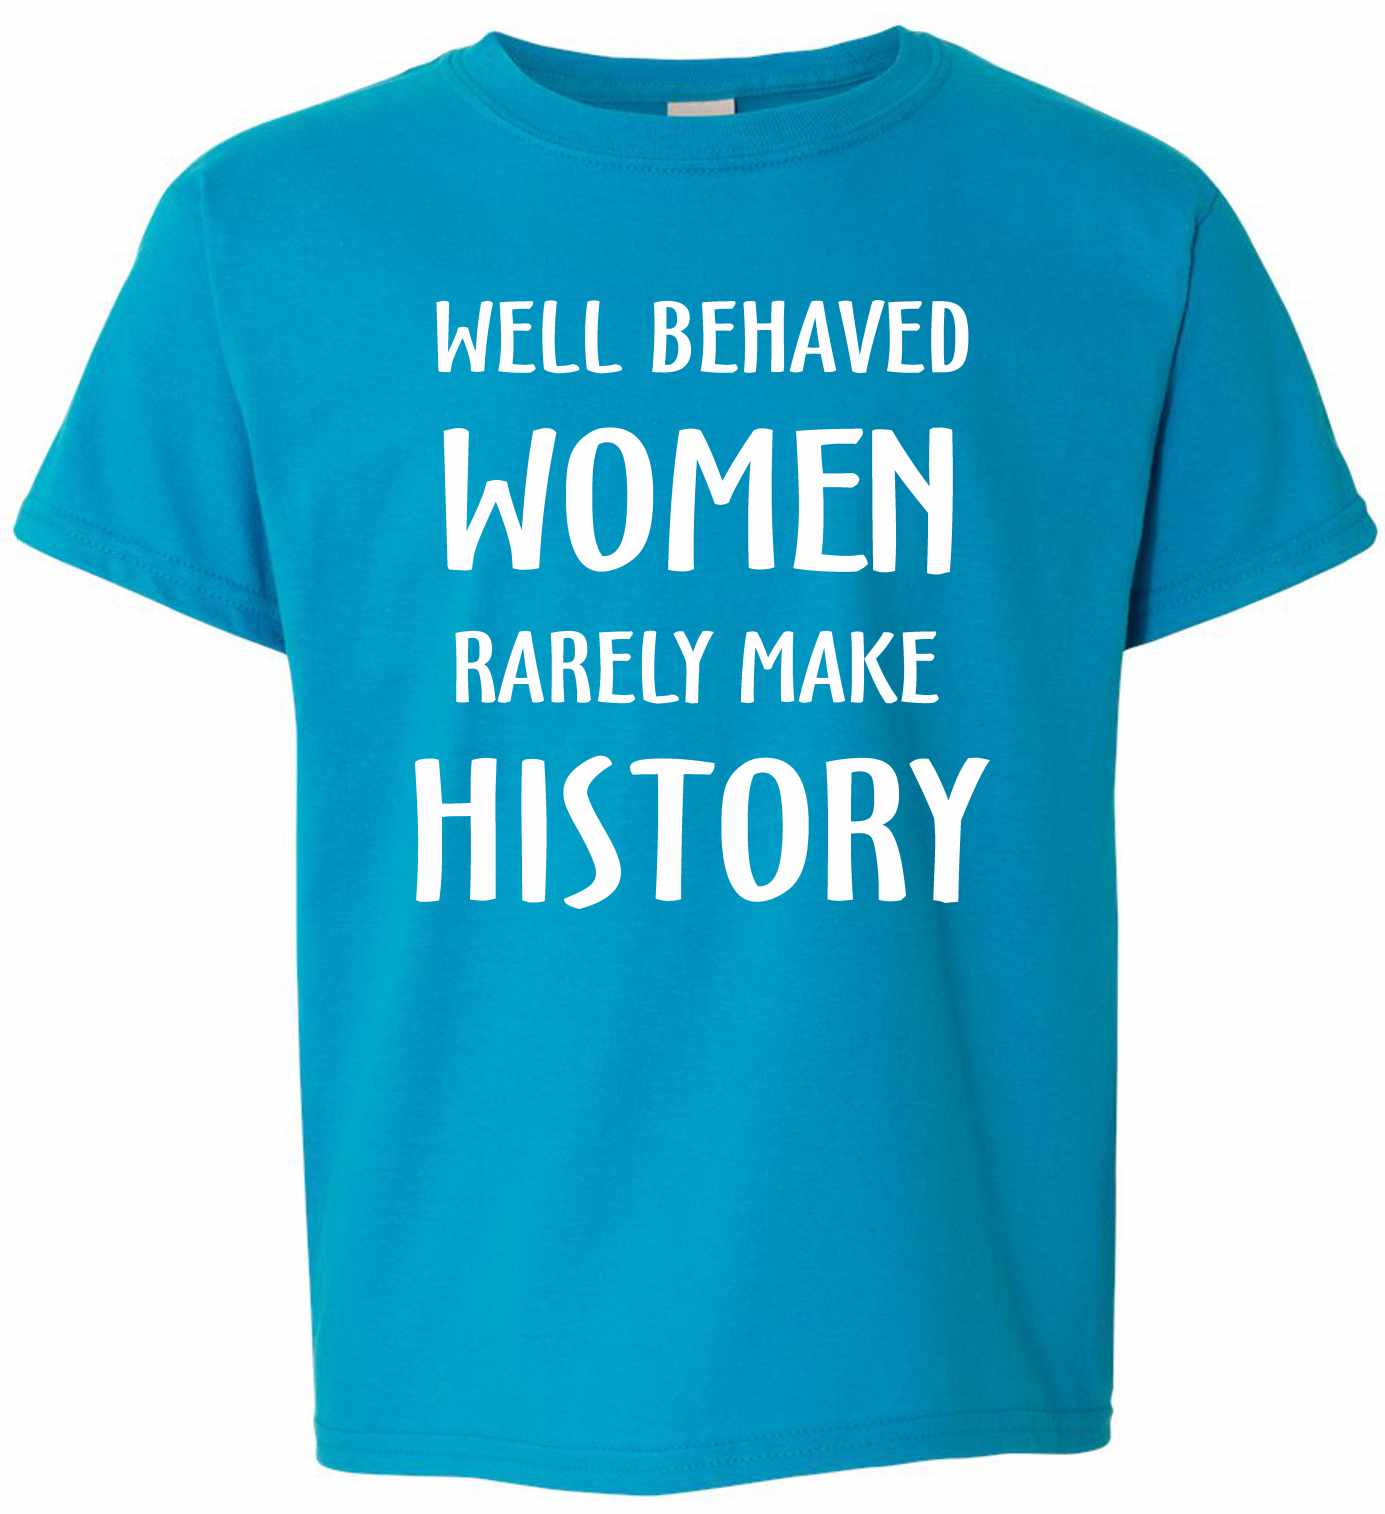 WELL BEHAVED WOMEN RARELY MAKE HISTORY on Kids T-Shirt (#332-201)